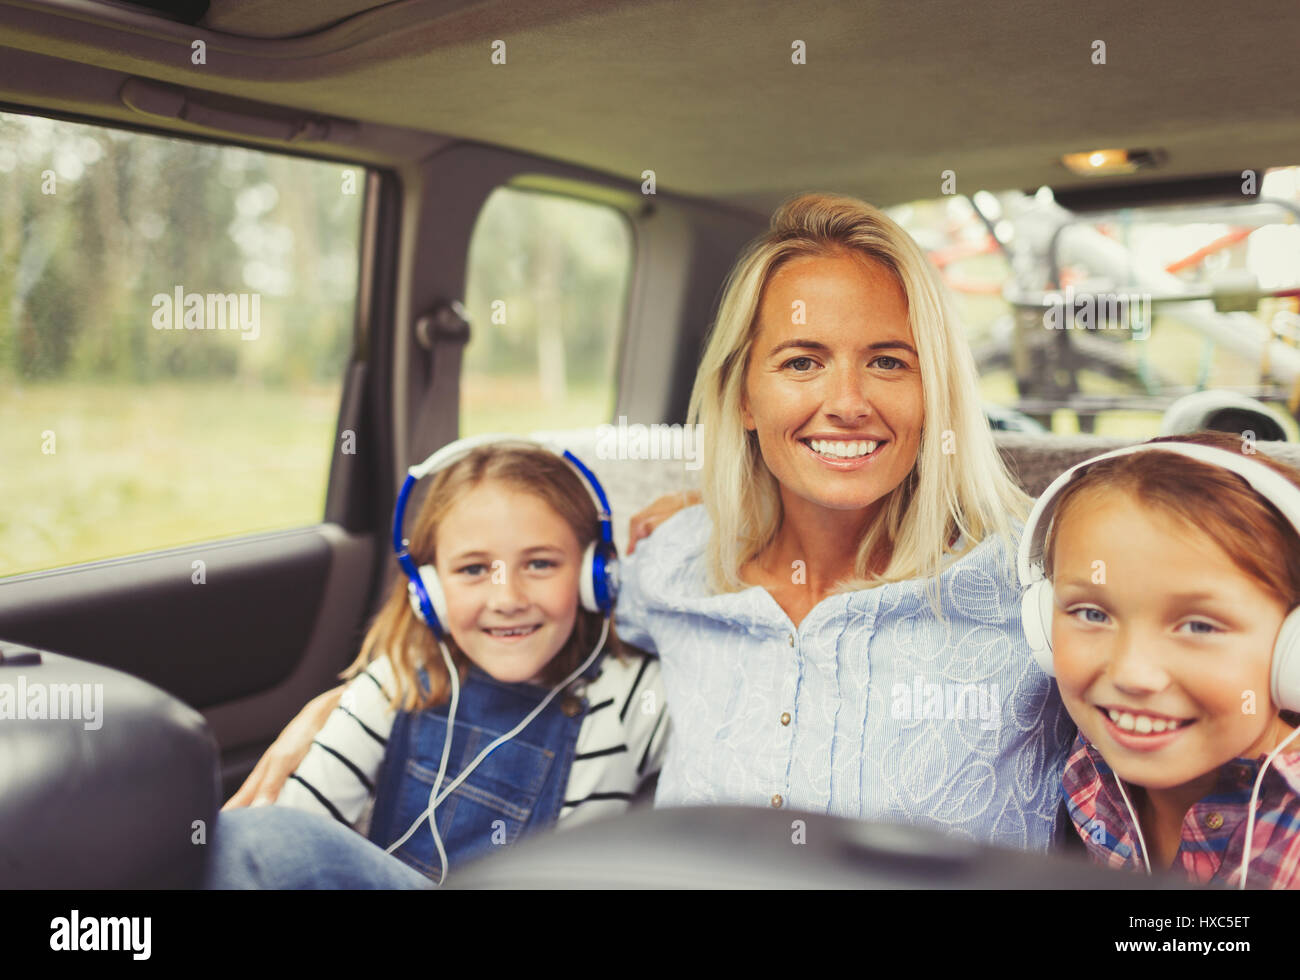 Portrait smiling mother and daughters wearing headphones in back seat of car Stock Photo